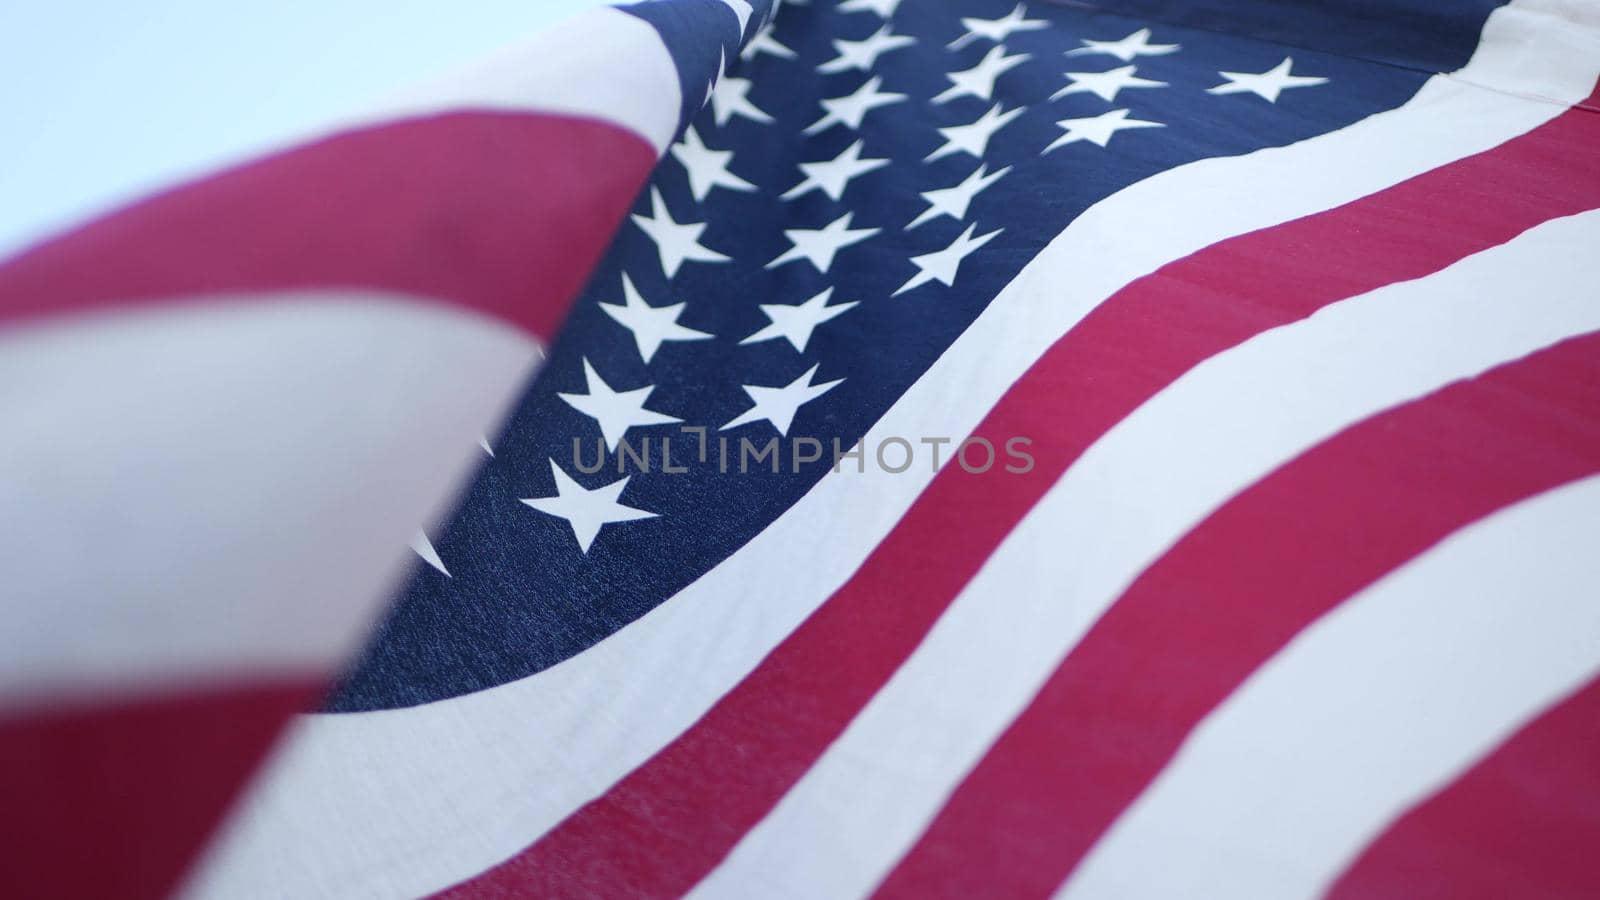 Soft focus close up of American Old Glory flag waving on wind. Stars and Stripes democracy, patriotism, freedom and Independence Day symbol. Star-spangled Banner, national pride and icon of liberty.